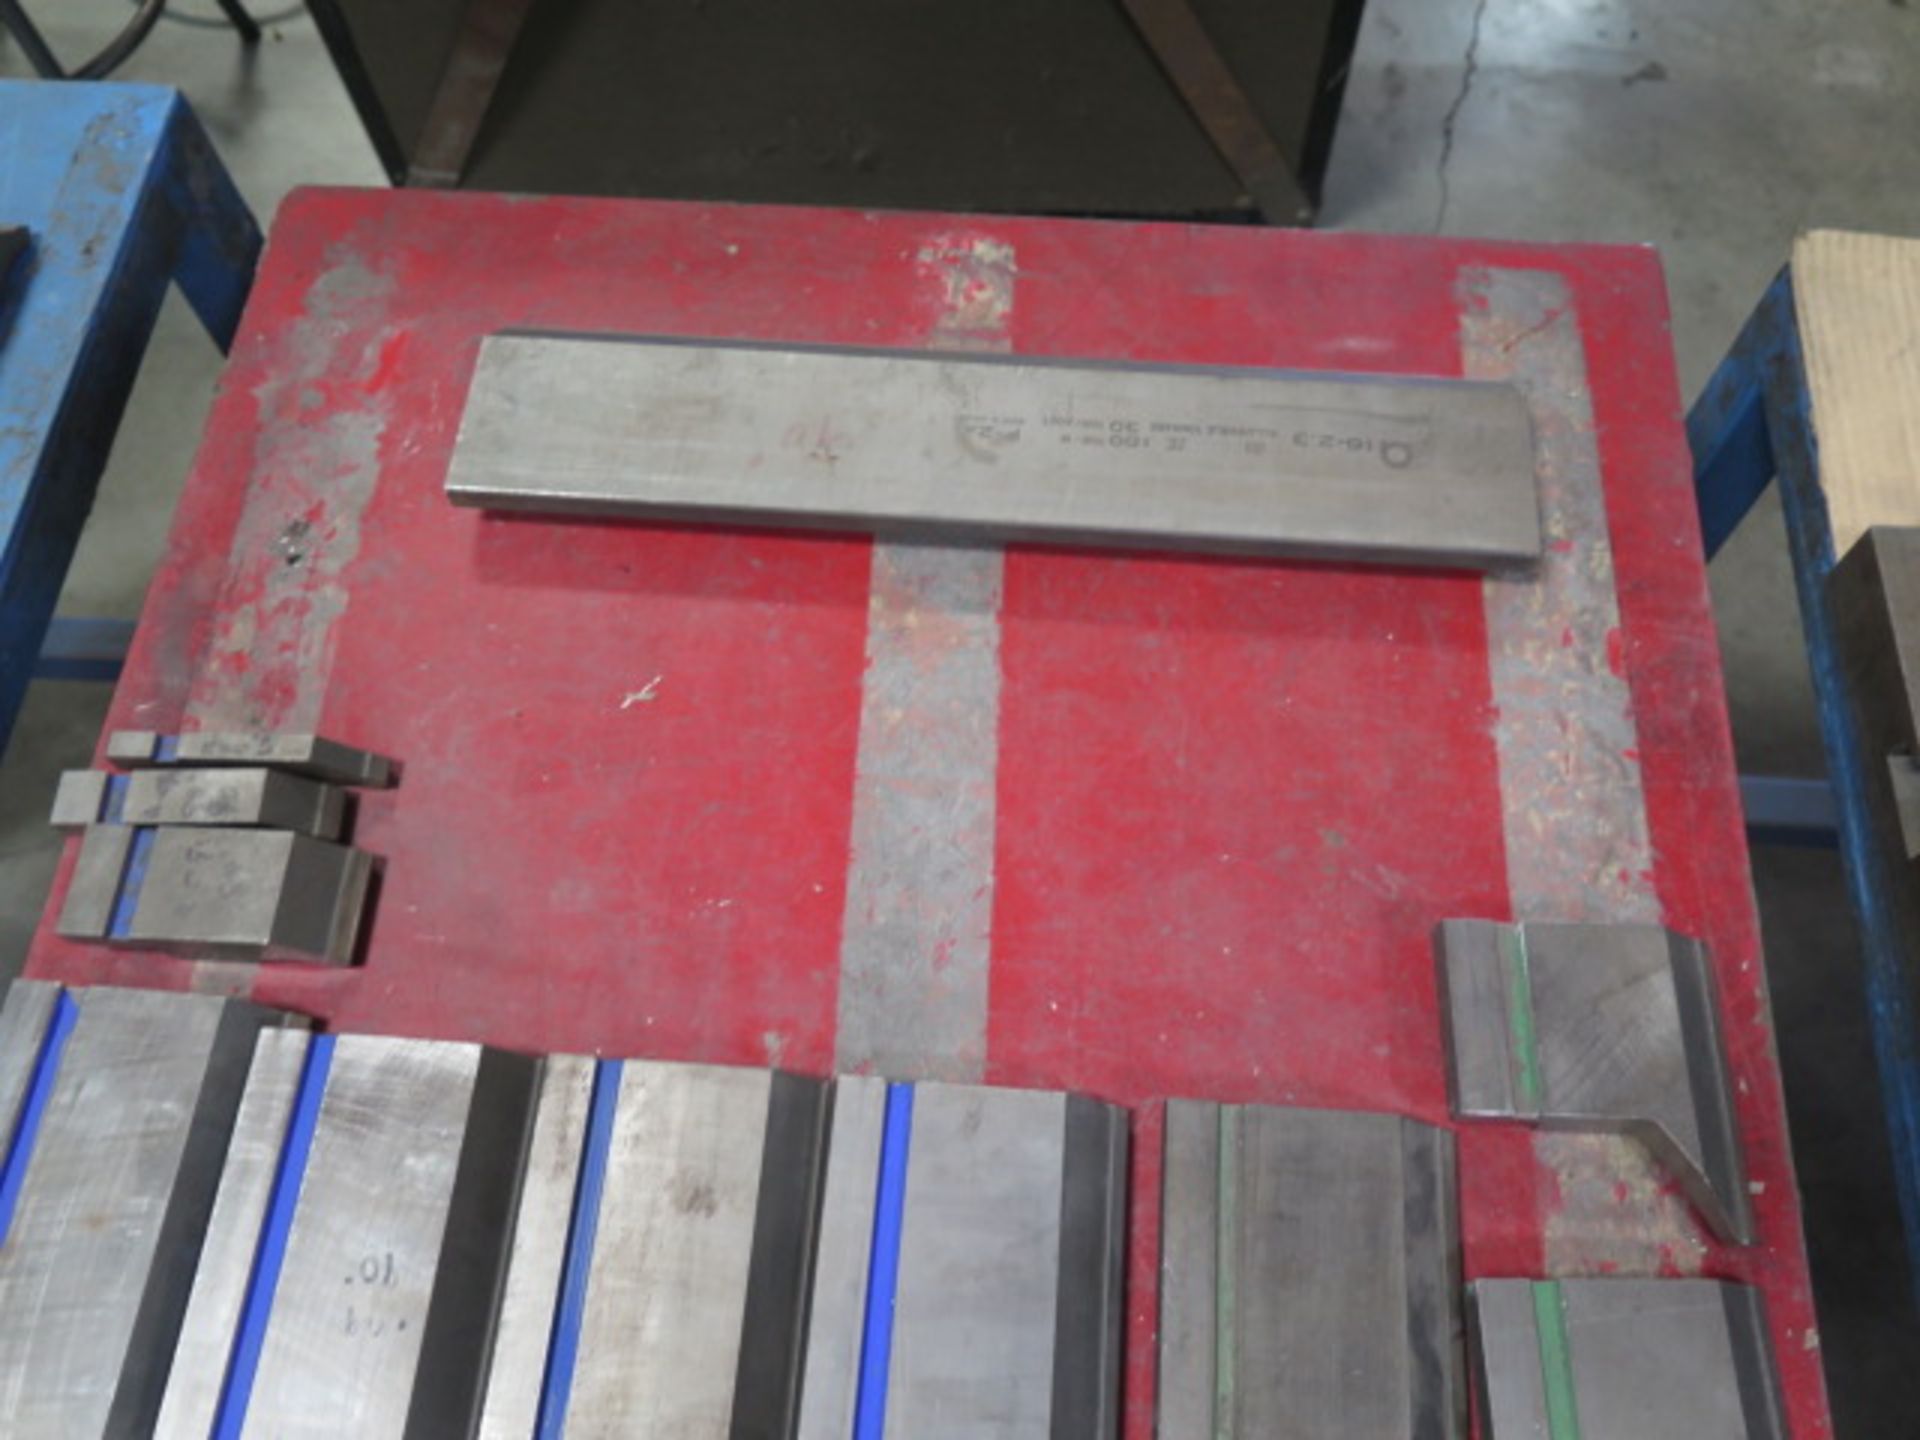 Amada Press Brake Tooling w/ Cart (SOLD AS-IS - NO WARRANTY) - Image 9 of 9